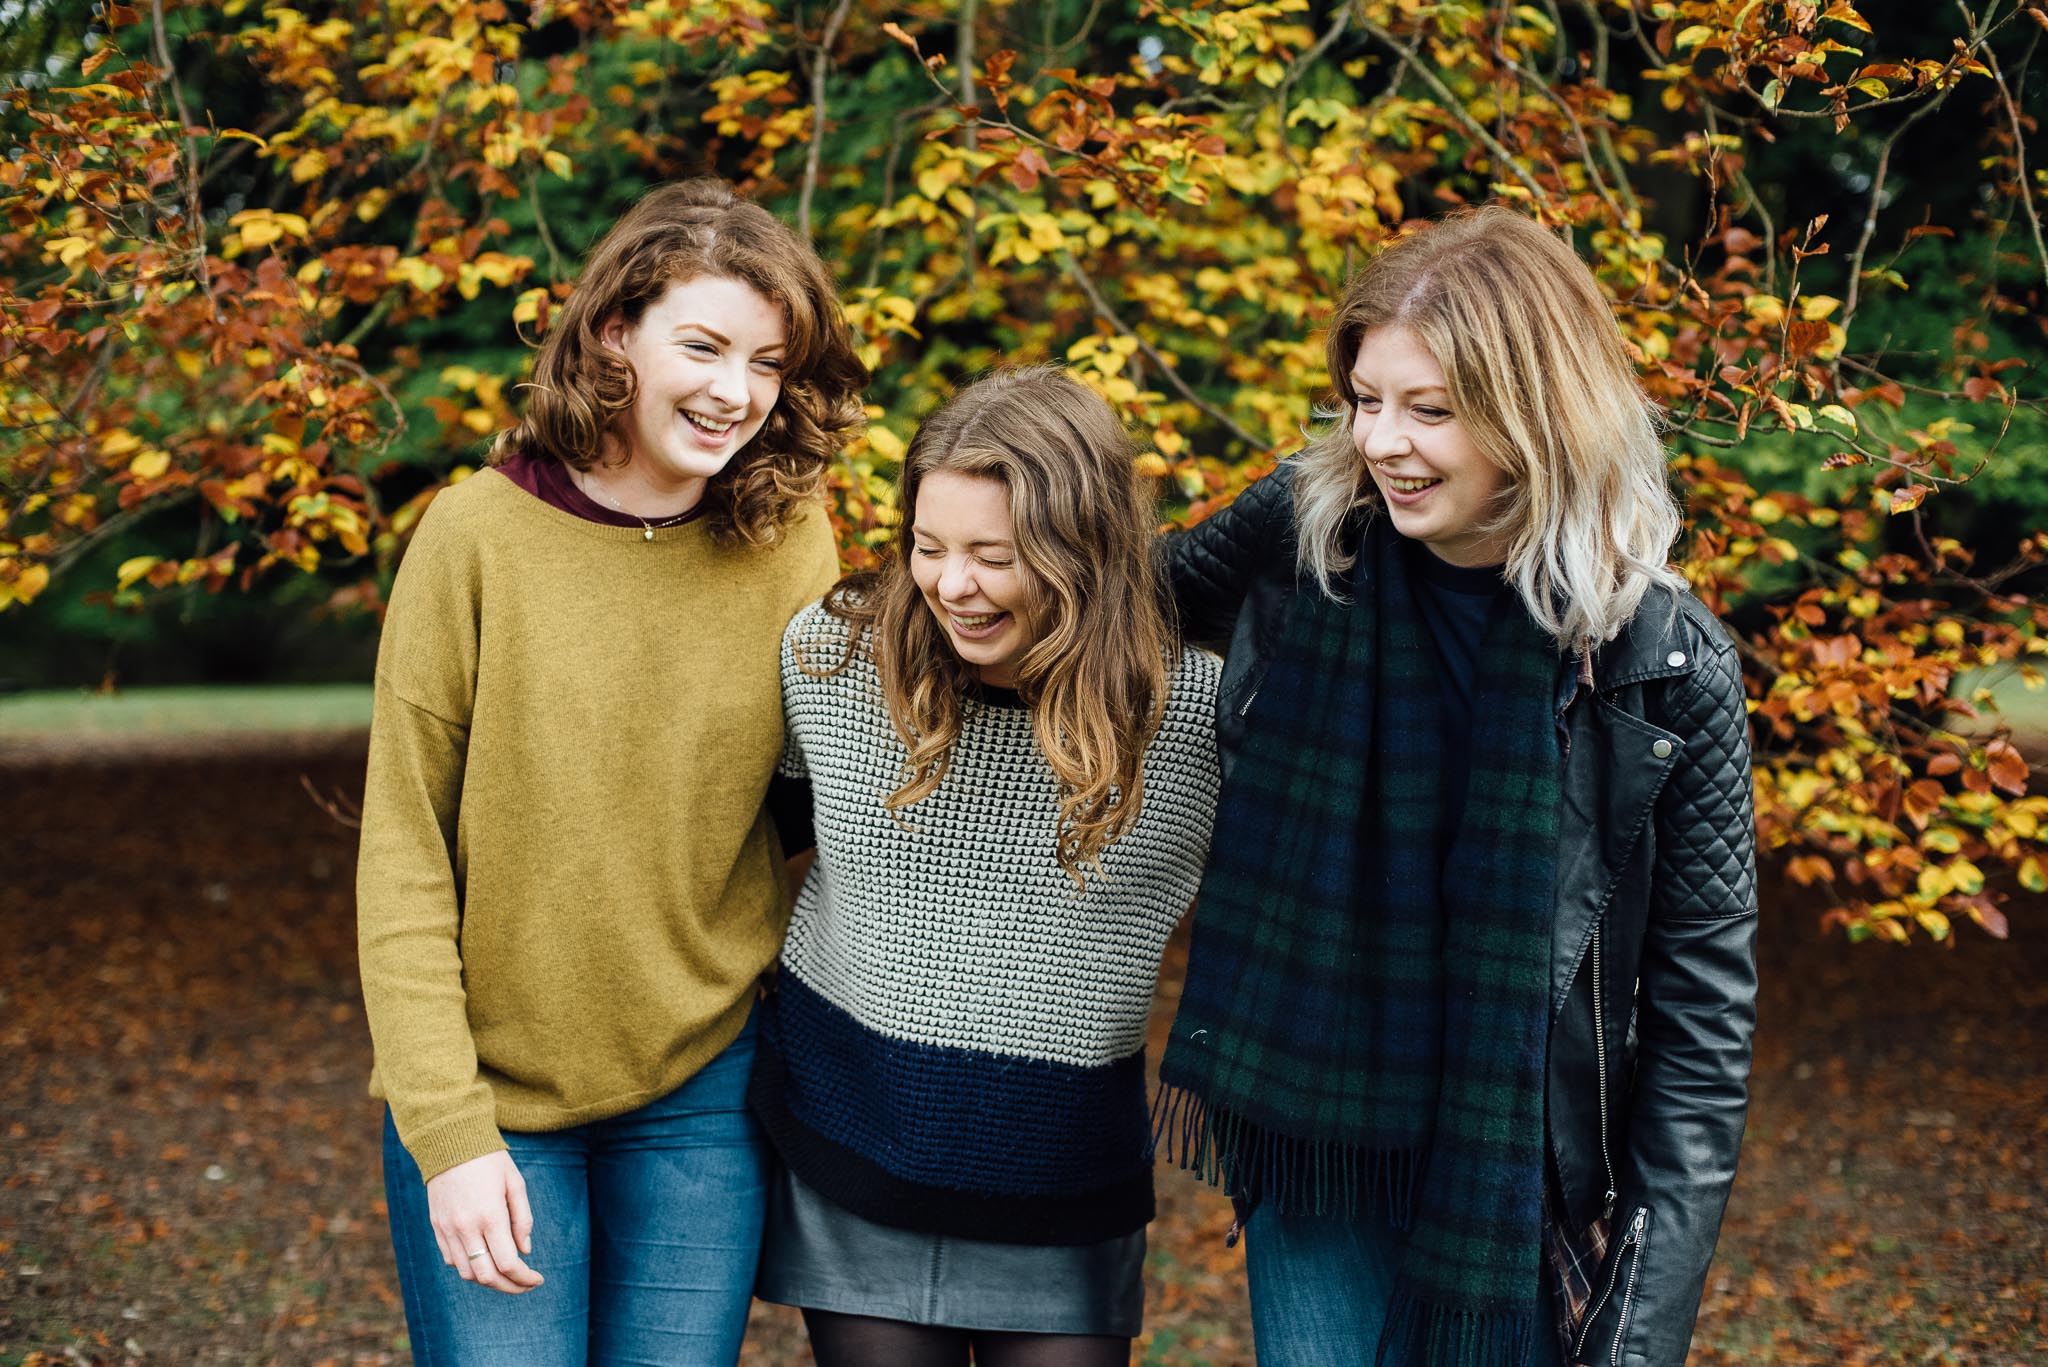 Surrey Family Photography, A Relaxed Family Shoot In Autumn Guildford